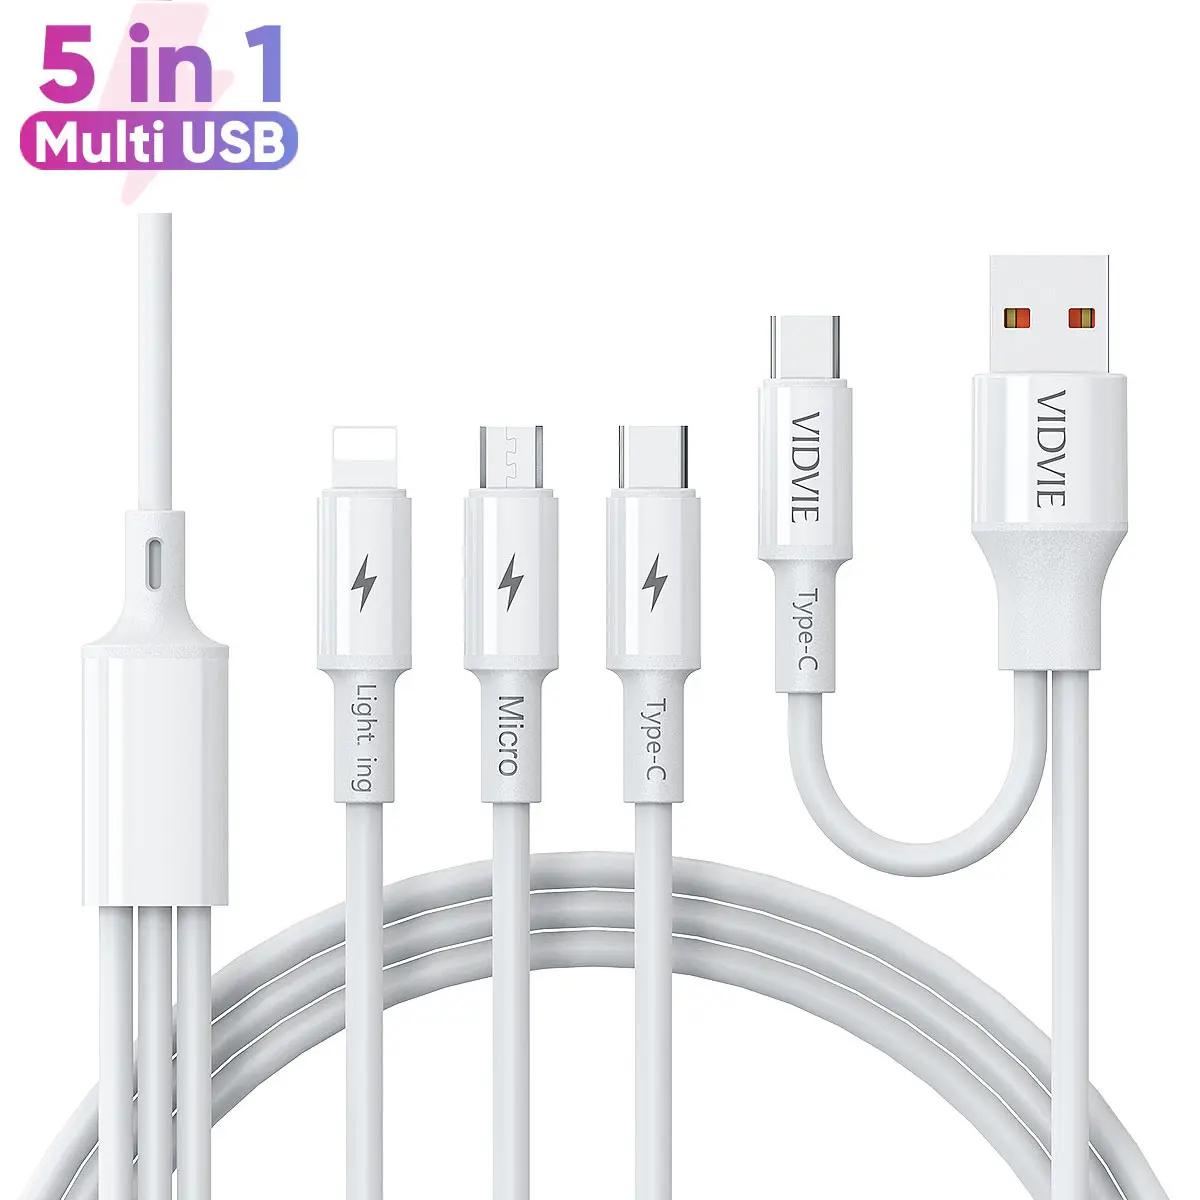 VIDVIE 5 in 1 Multi Functional USB 2.4A Fast Charging Phone Charger Cable